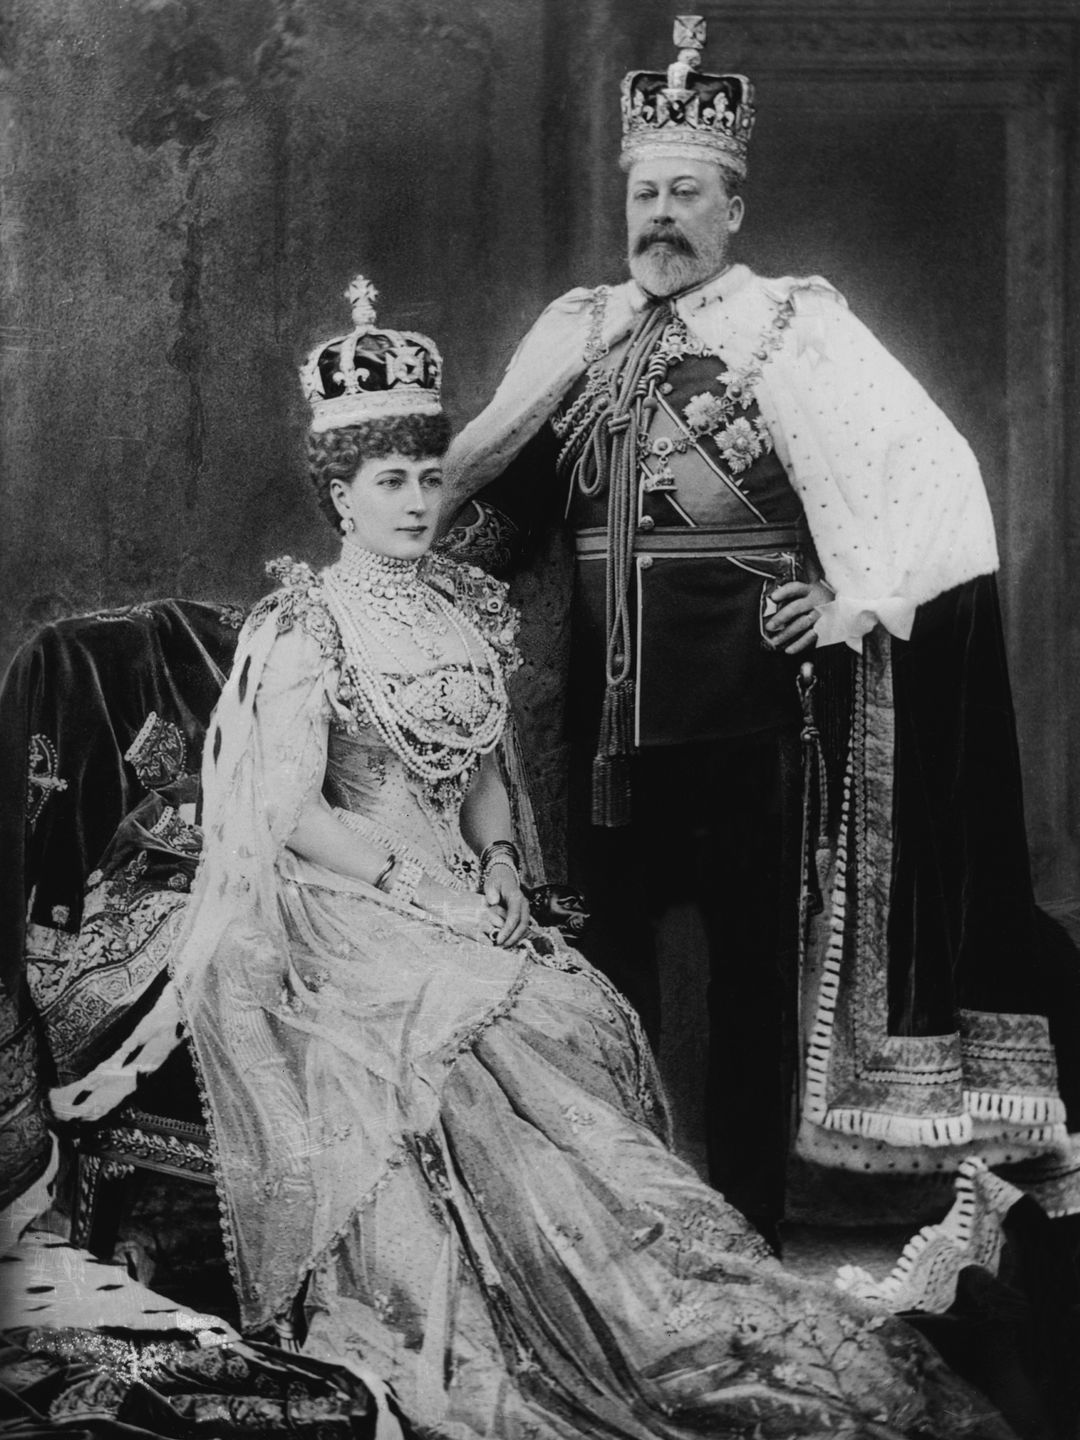 King Edward VII with his consort Queen Alexandra on the day of his Coronation in 1902